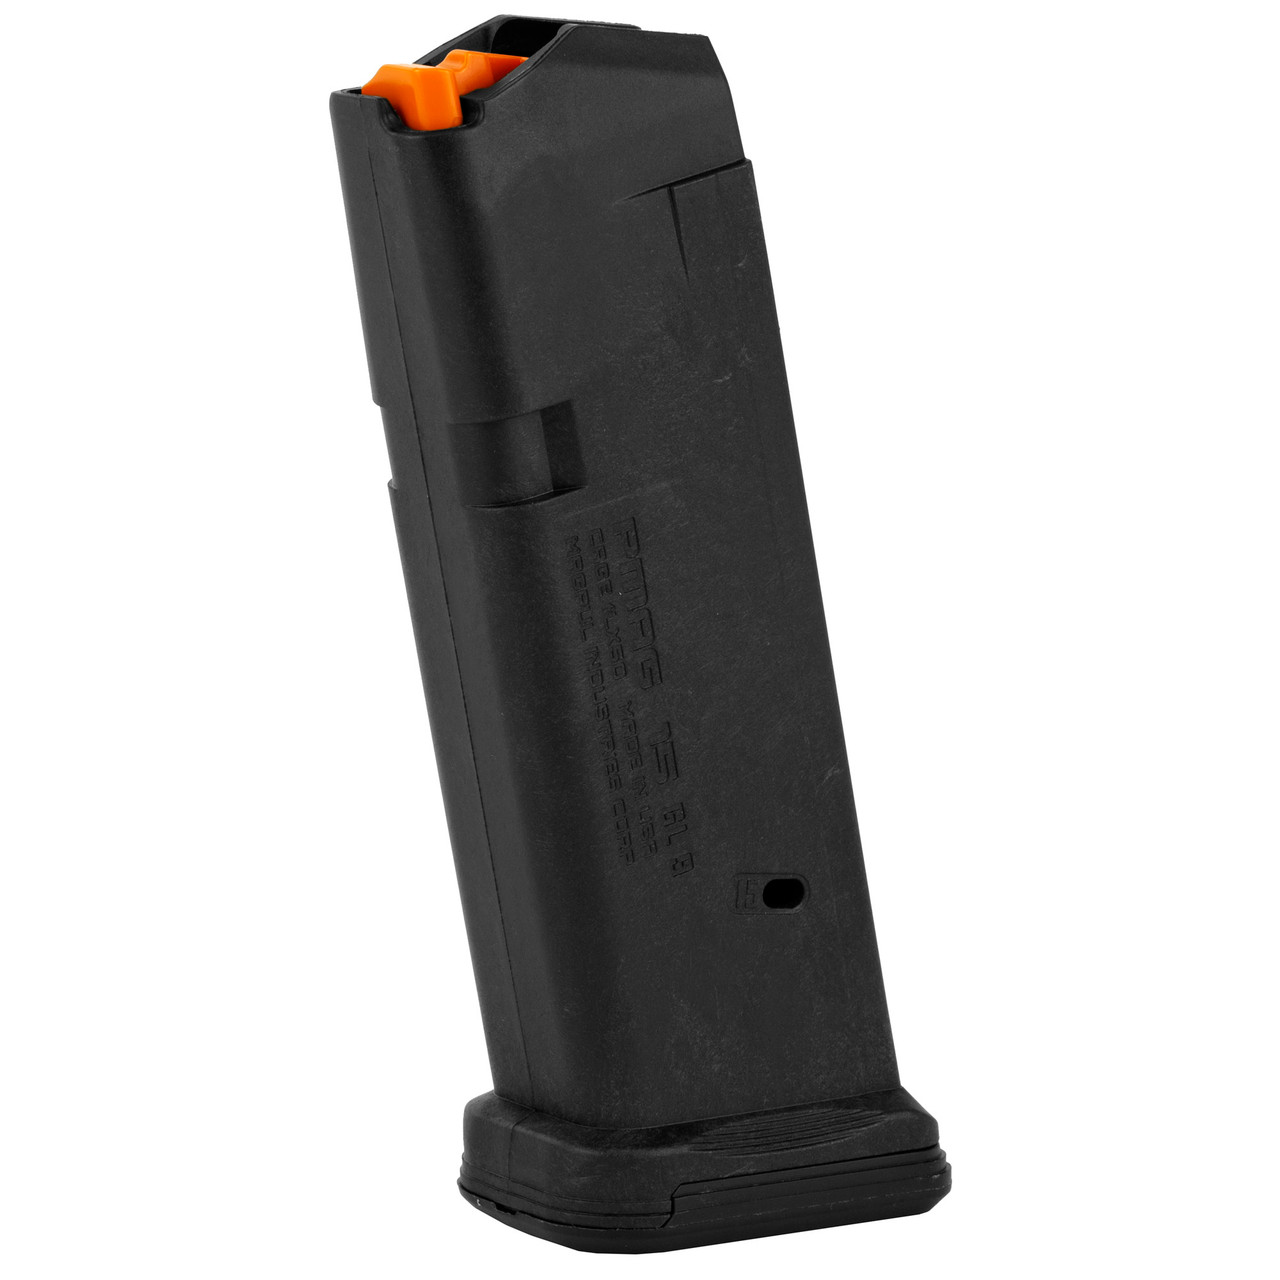 Magpul Industries MAG550-BLK Pmag For Glock 19 15rd Blk